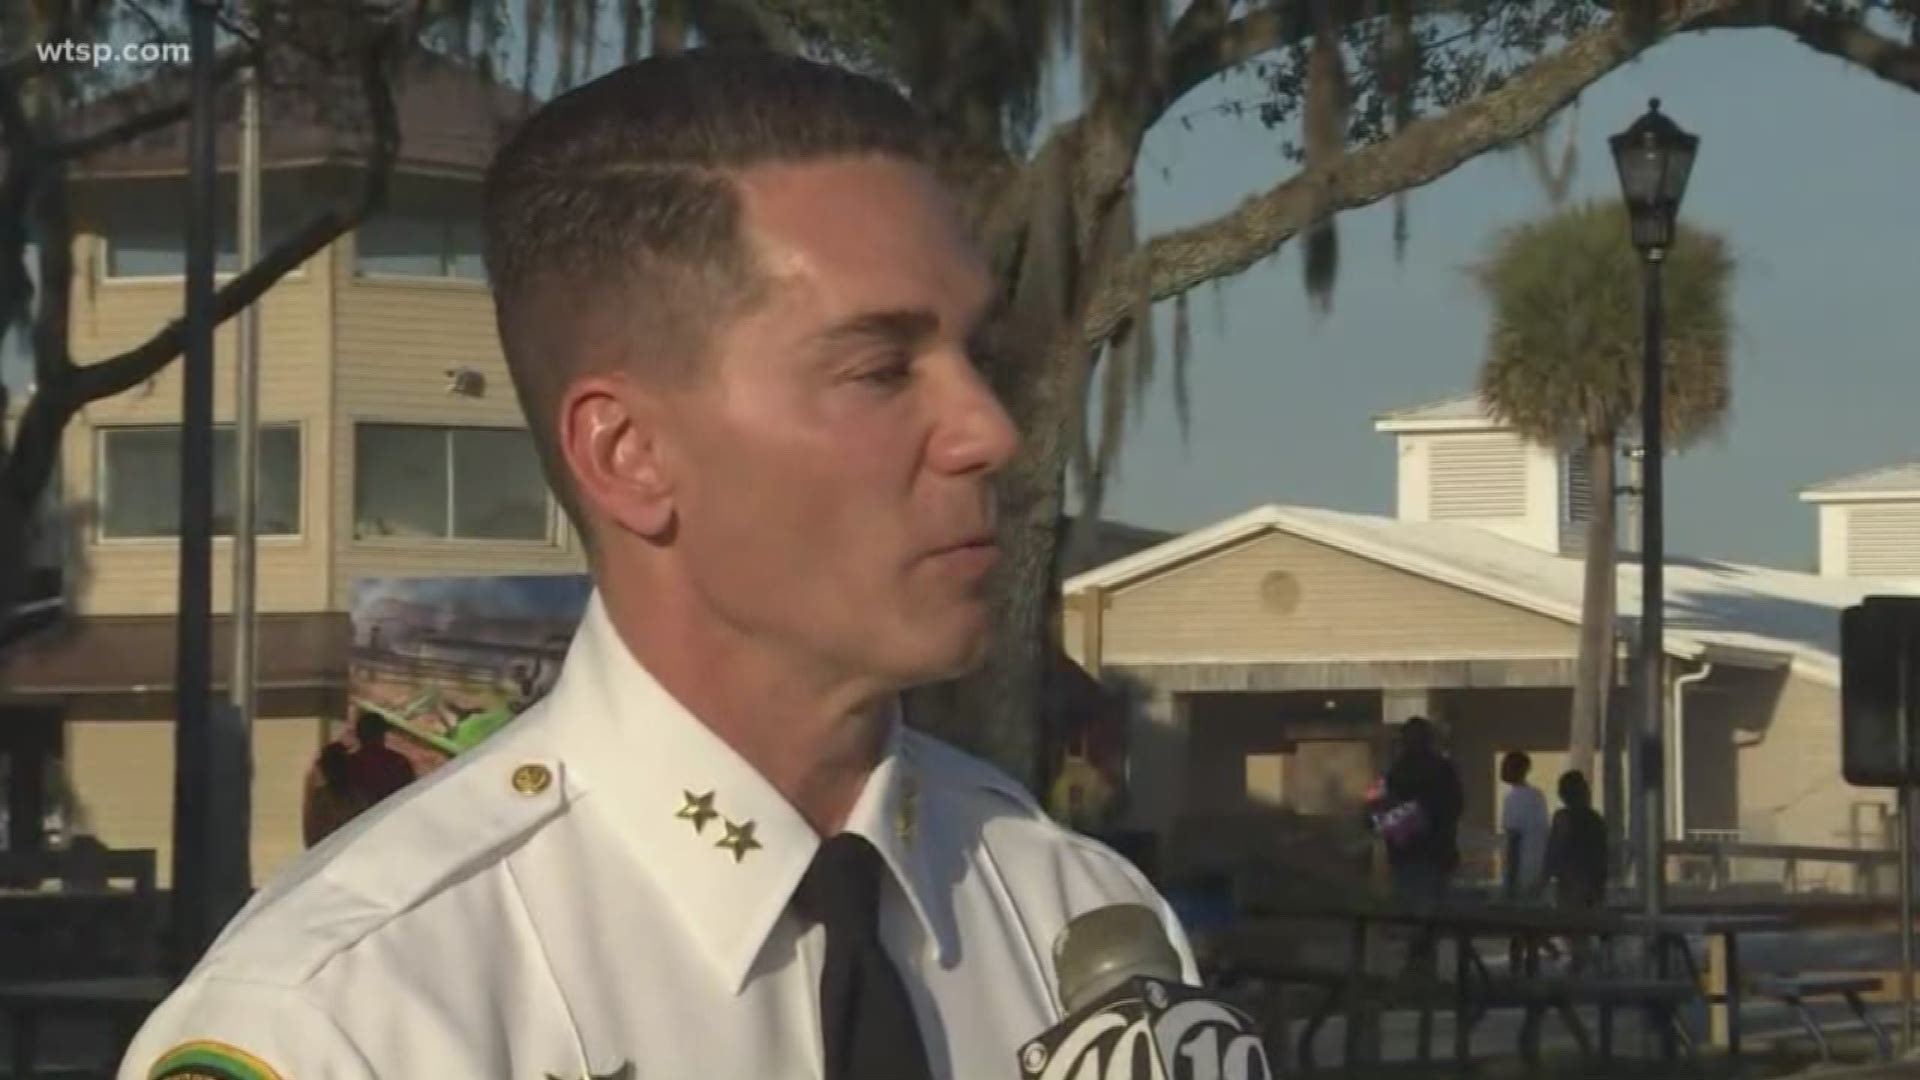 We talk to Sheriff Chad Chronister about how law enforcement is keeping an eye on the crowd to prevent problems.